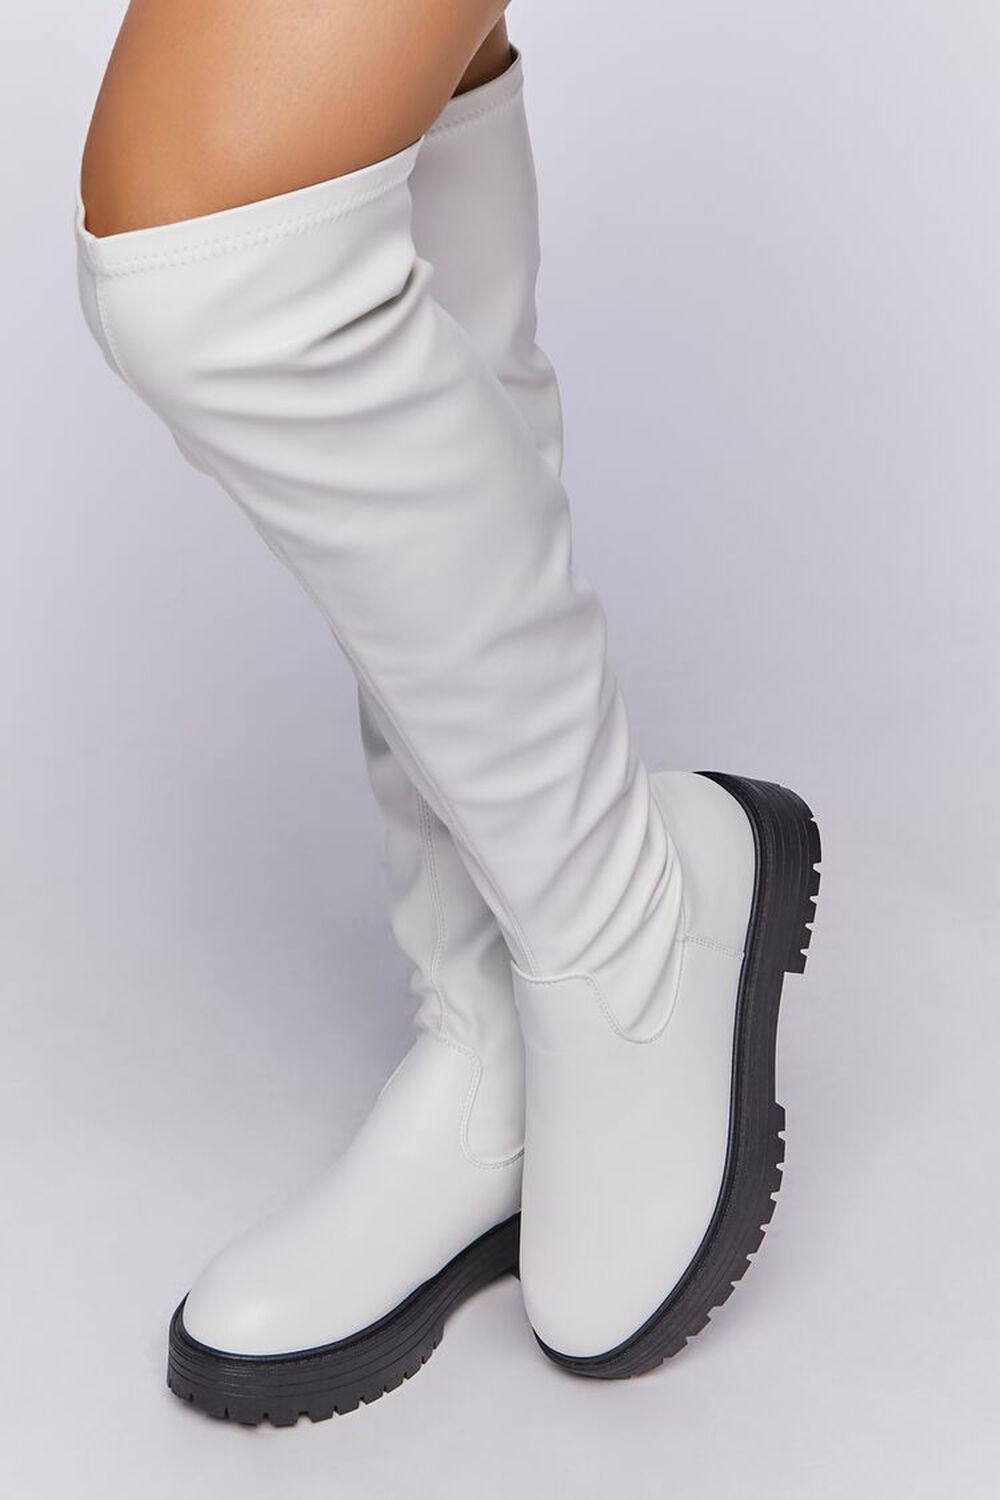 WHITE Over-the-Knee Lug-Sole Boots, image 1